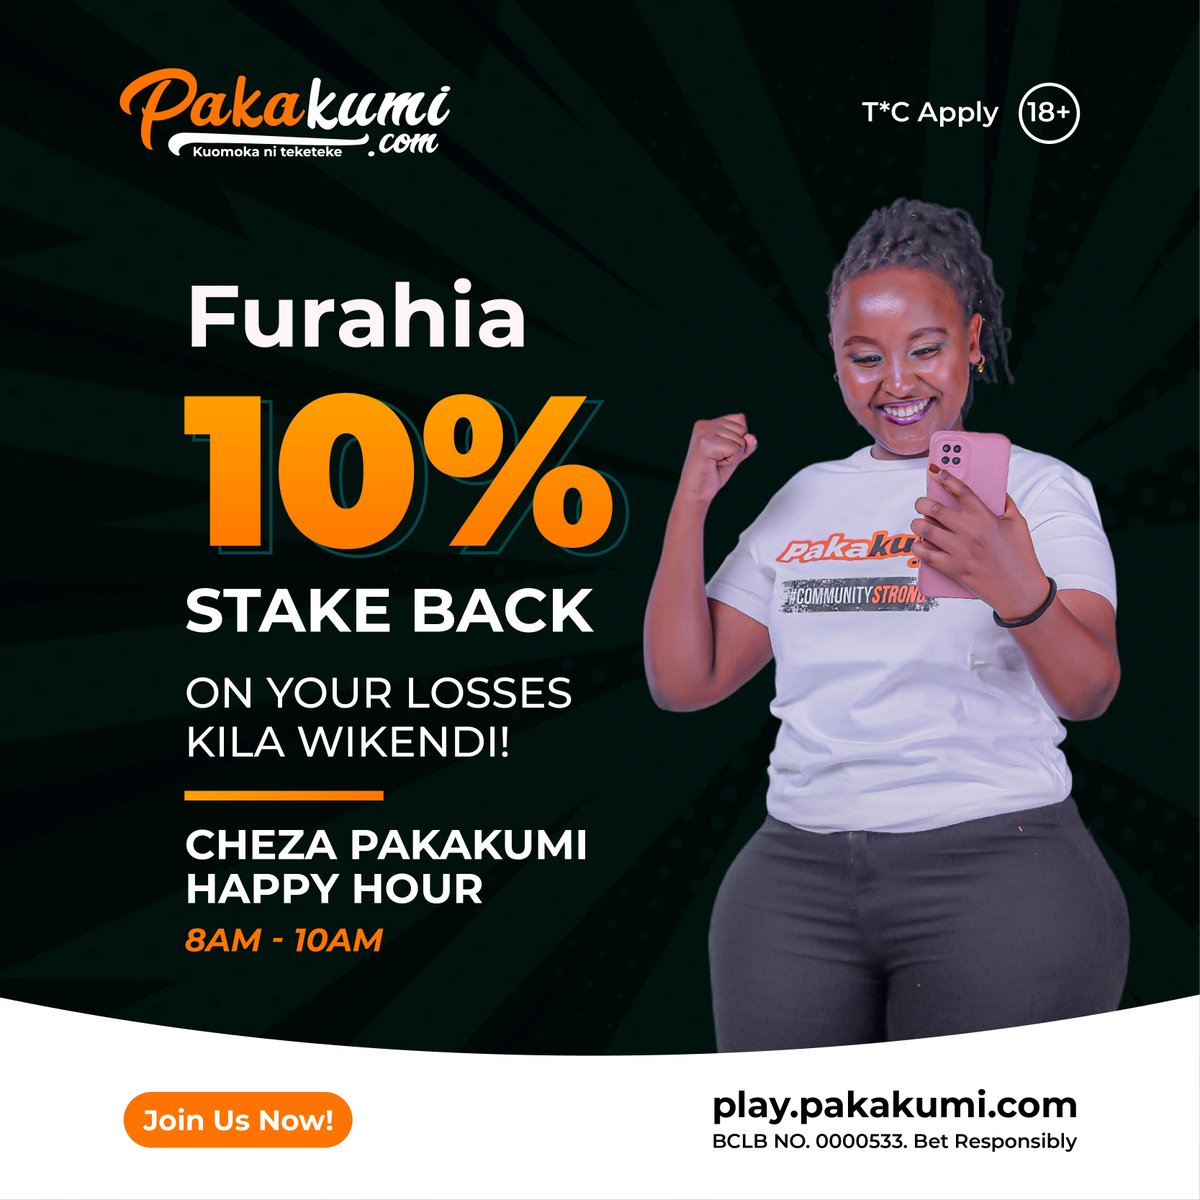 Tegea happy hour every weekend on Pakakumi and get 10% stake back on losses during that time🔥🤑 Play the game with the BIGGEST PAYOUTS in Kenya and win big! Pakakumi inalipa💸 Register today! play.pakakumi.com